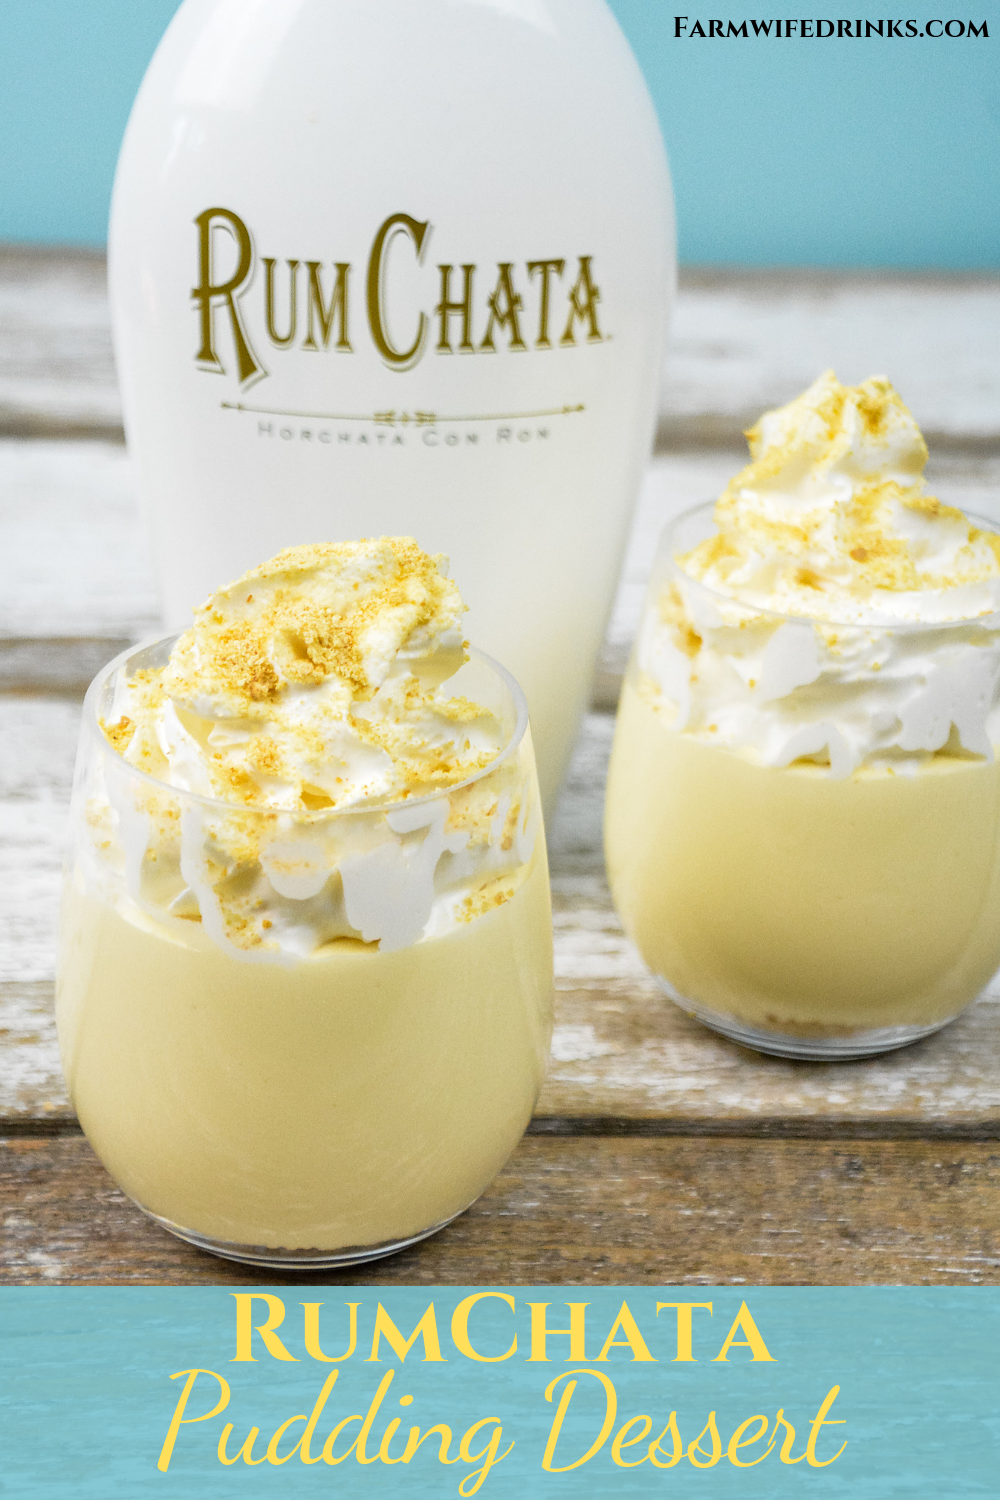 Rumchata Pudding Cup Dessert is the spiked version of sand pudding by just substituting some of the milk in the pudding for Rumchata. #Rumchata #Dessert #SandDessert #Spiked #PuddingShots